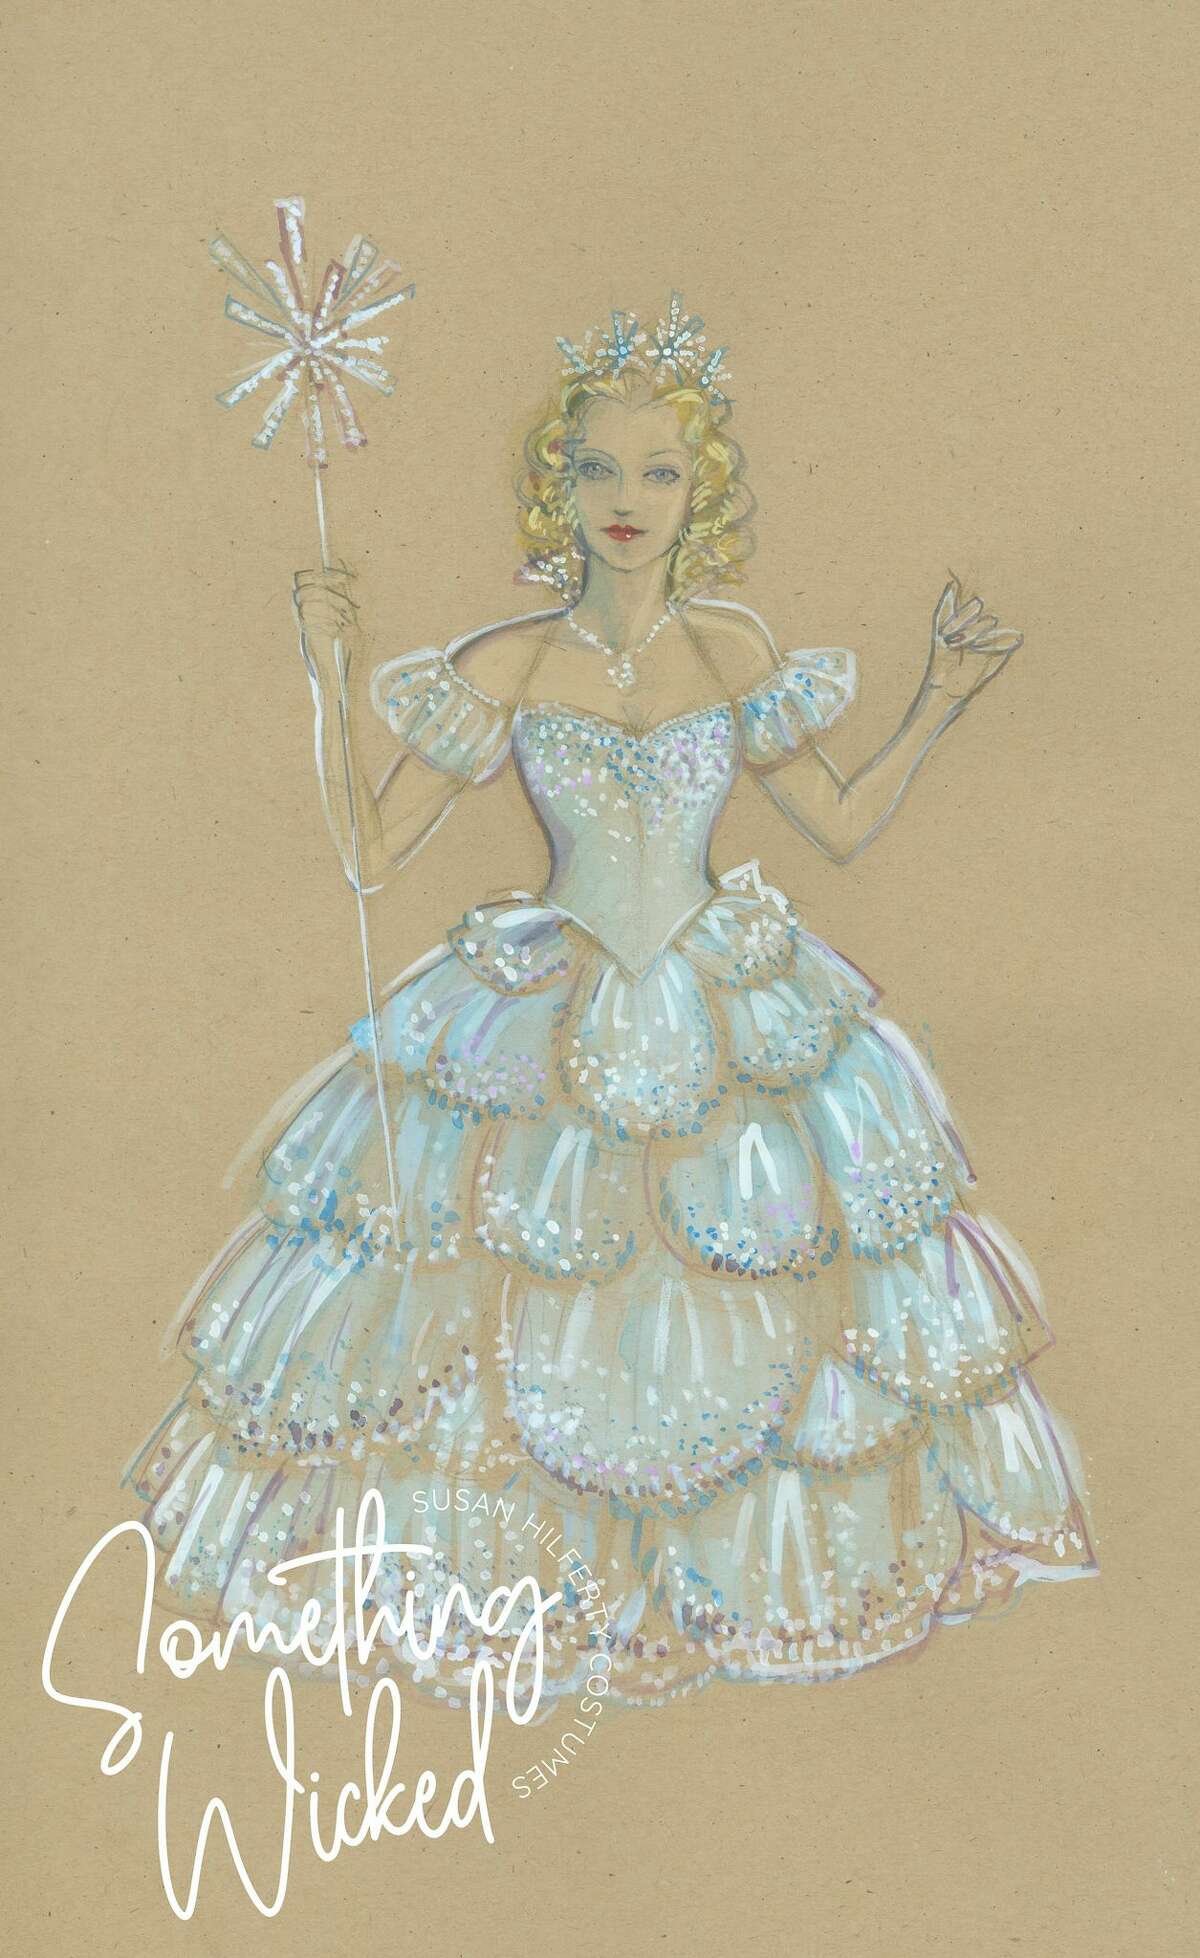 Susan Hilferty's design for Glinda the Good's bubble dress in the musical 